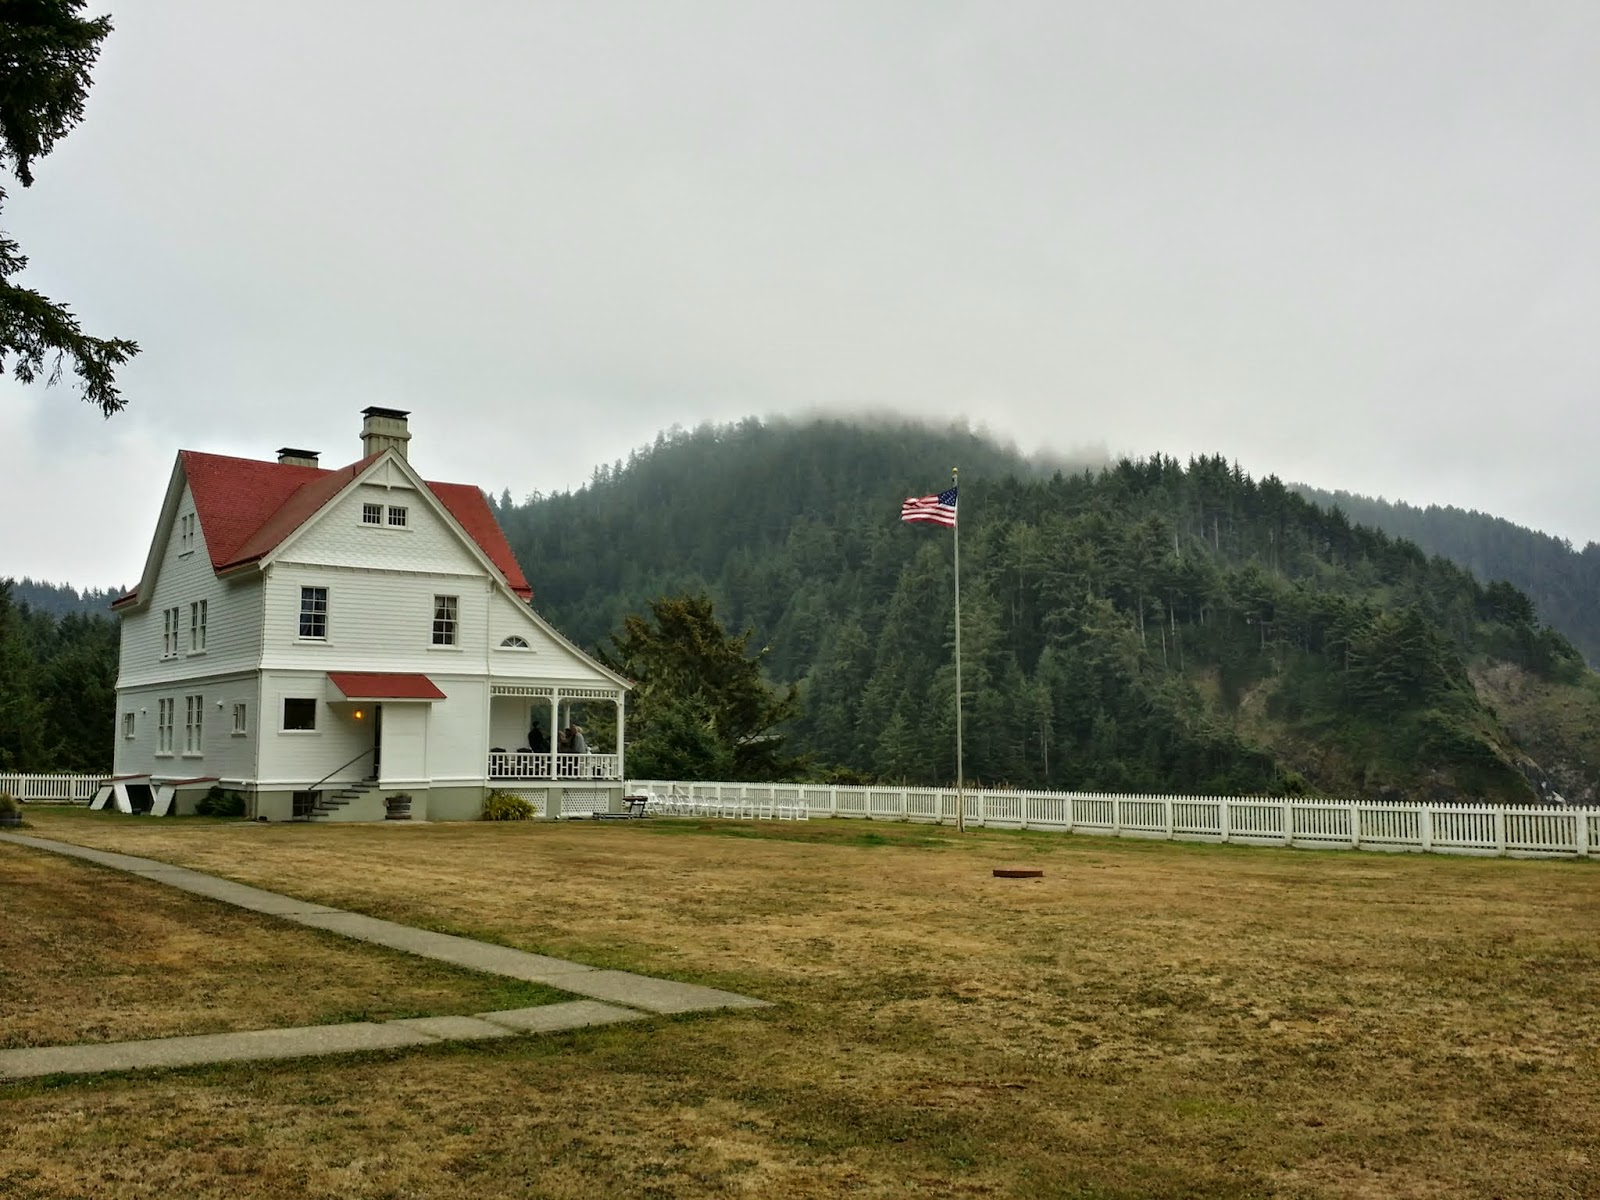 Heceta Head Lighthouse keepers quarters - now a Bed & Breakfast